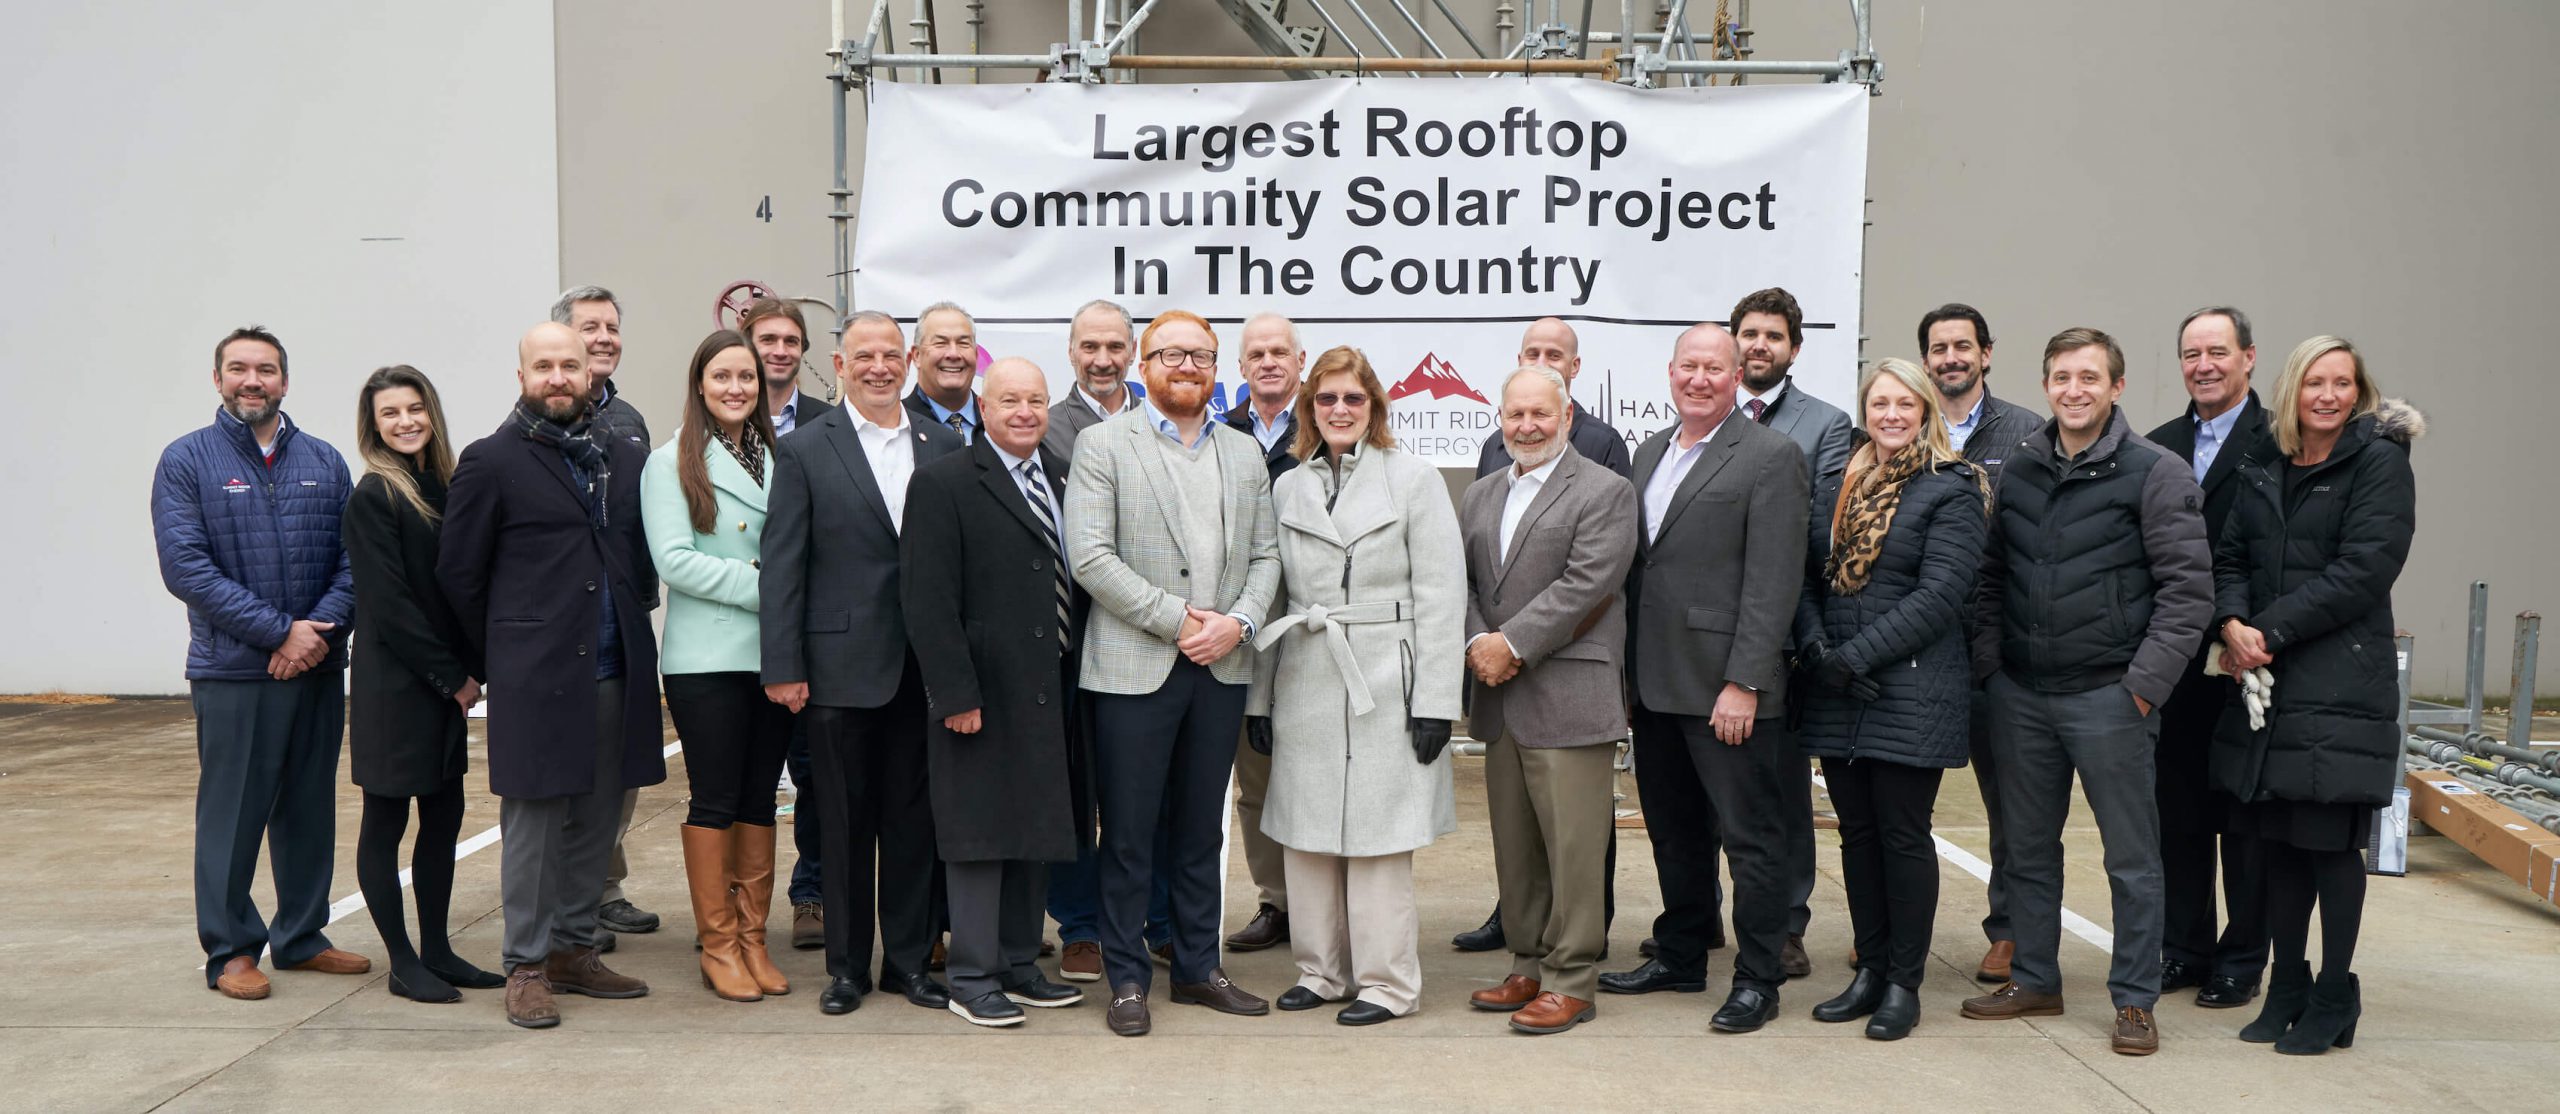 Apollo Funds Announce $175 Million Strategic Investment in Summit Ridge Energy, a Leading Owner-Operator of Community Solar